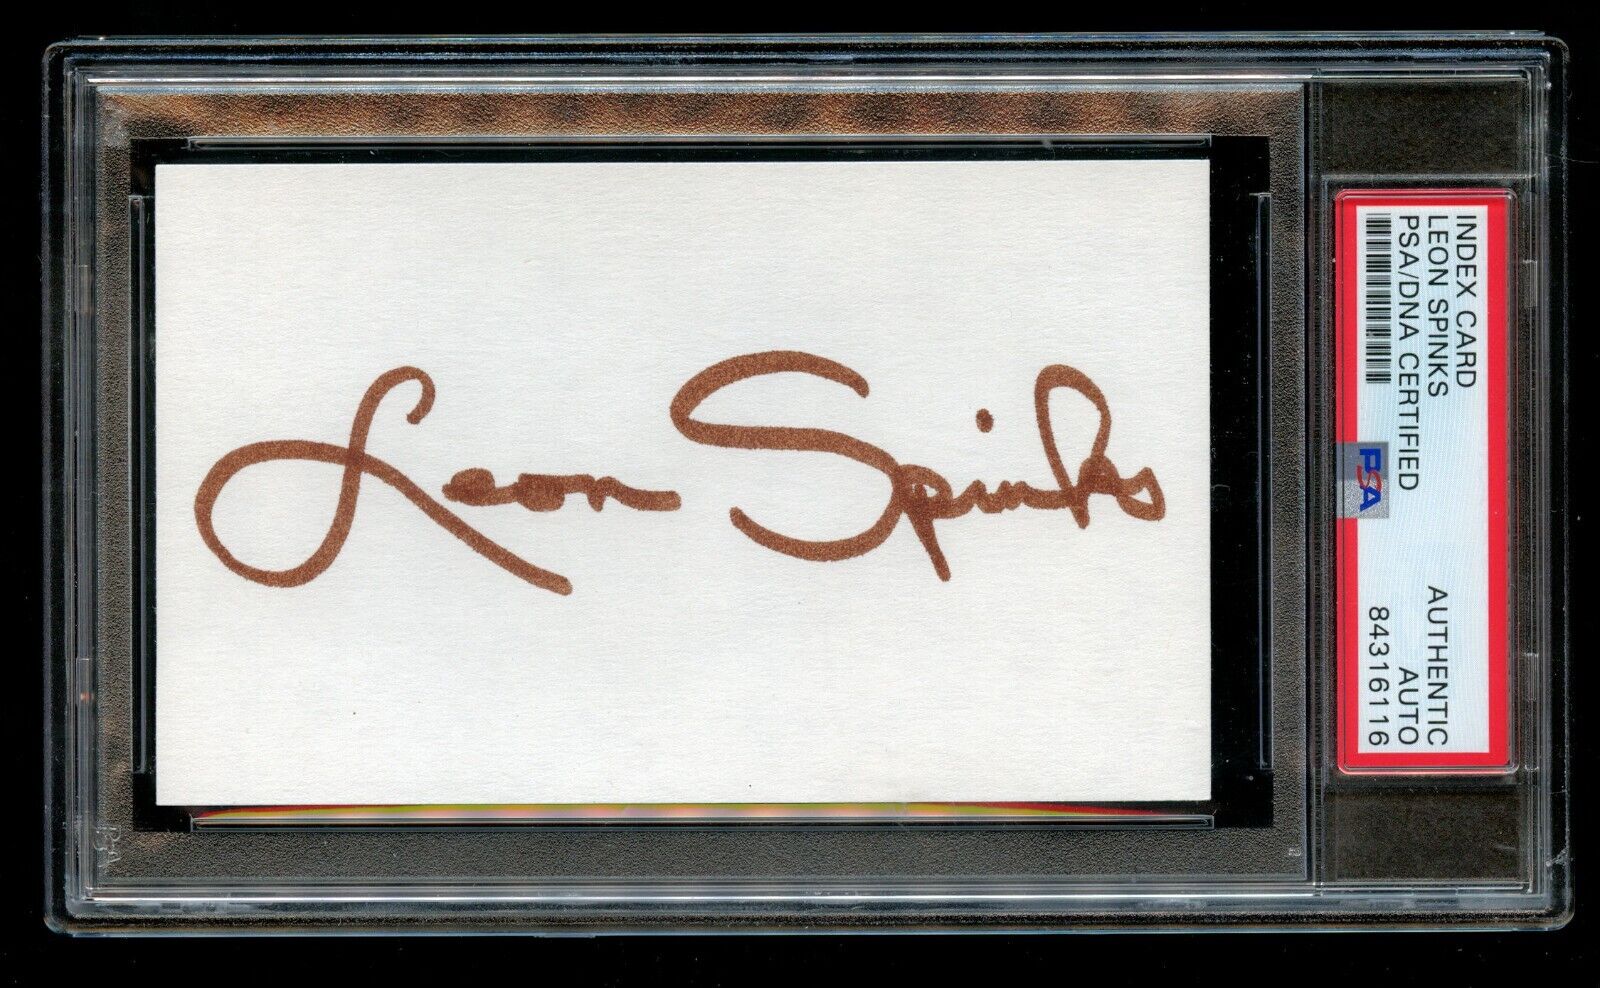 Leon Spinks Signed Autograph Auto 3x5 Card 1978 Boxing Champion Psa Slabbed